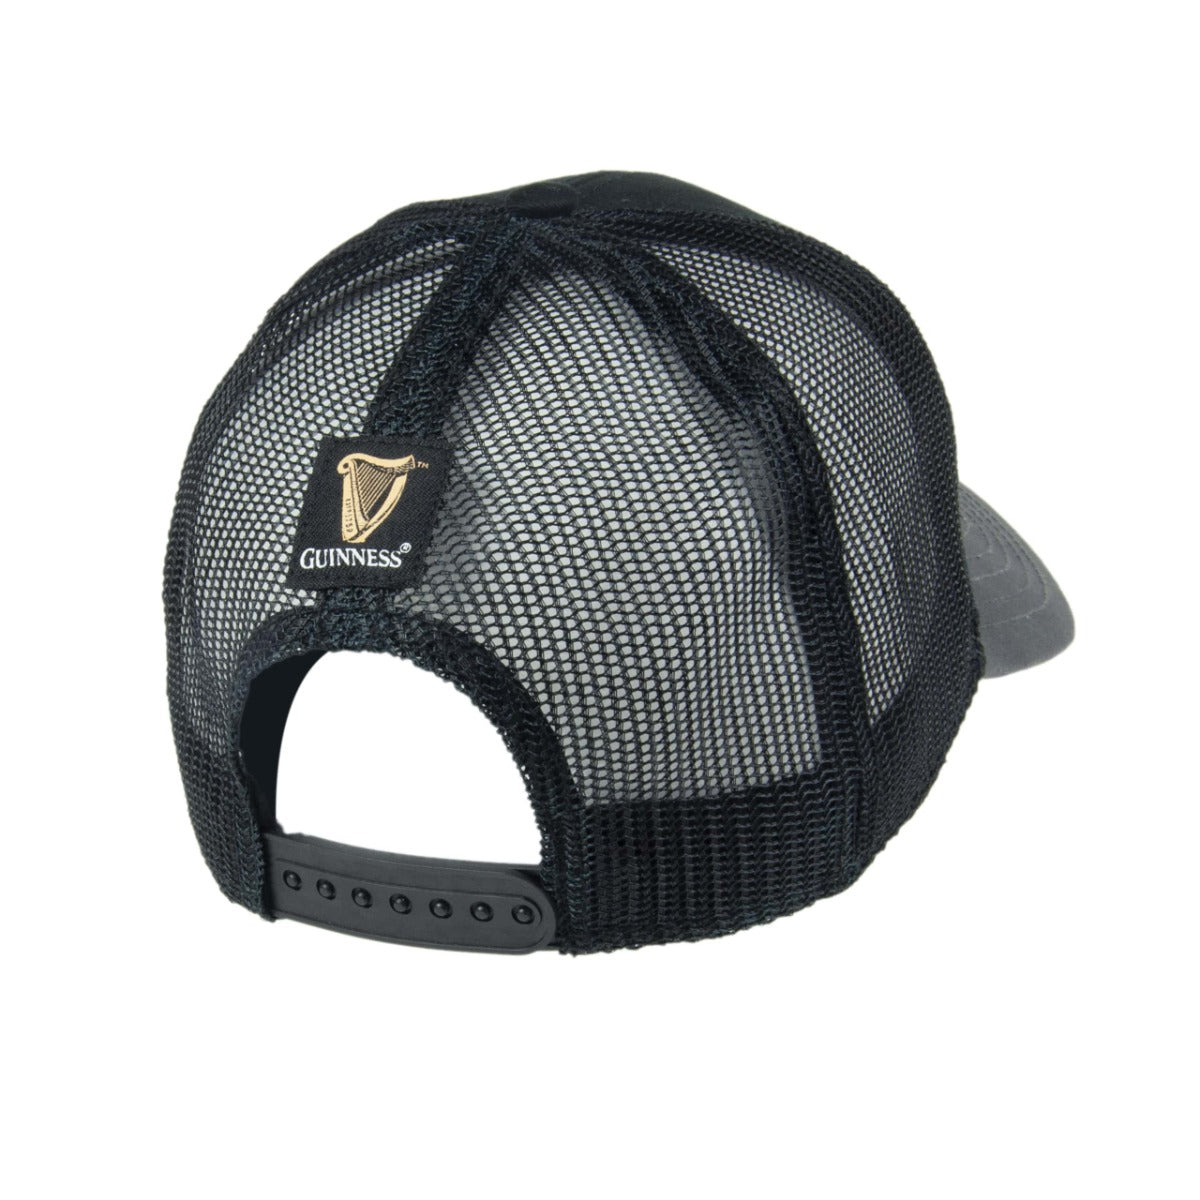 The Guinness Trucker Premium Grey with Embroidered Patch Cap is an embroidered cotton cap.